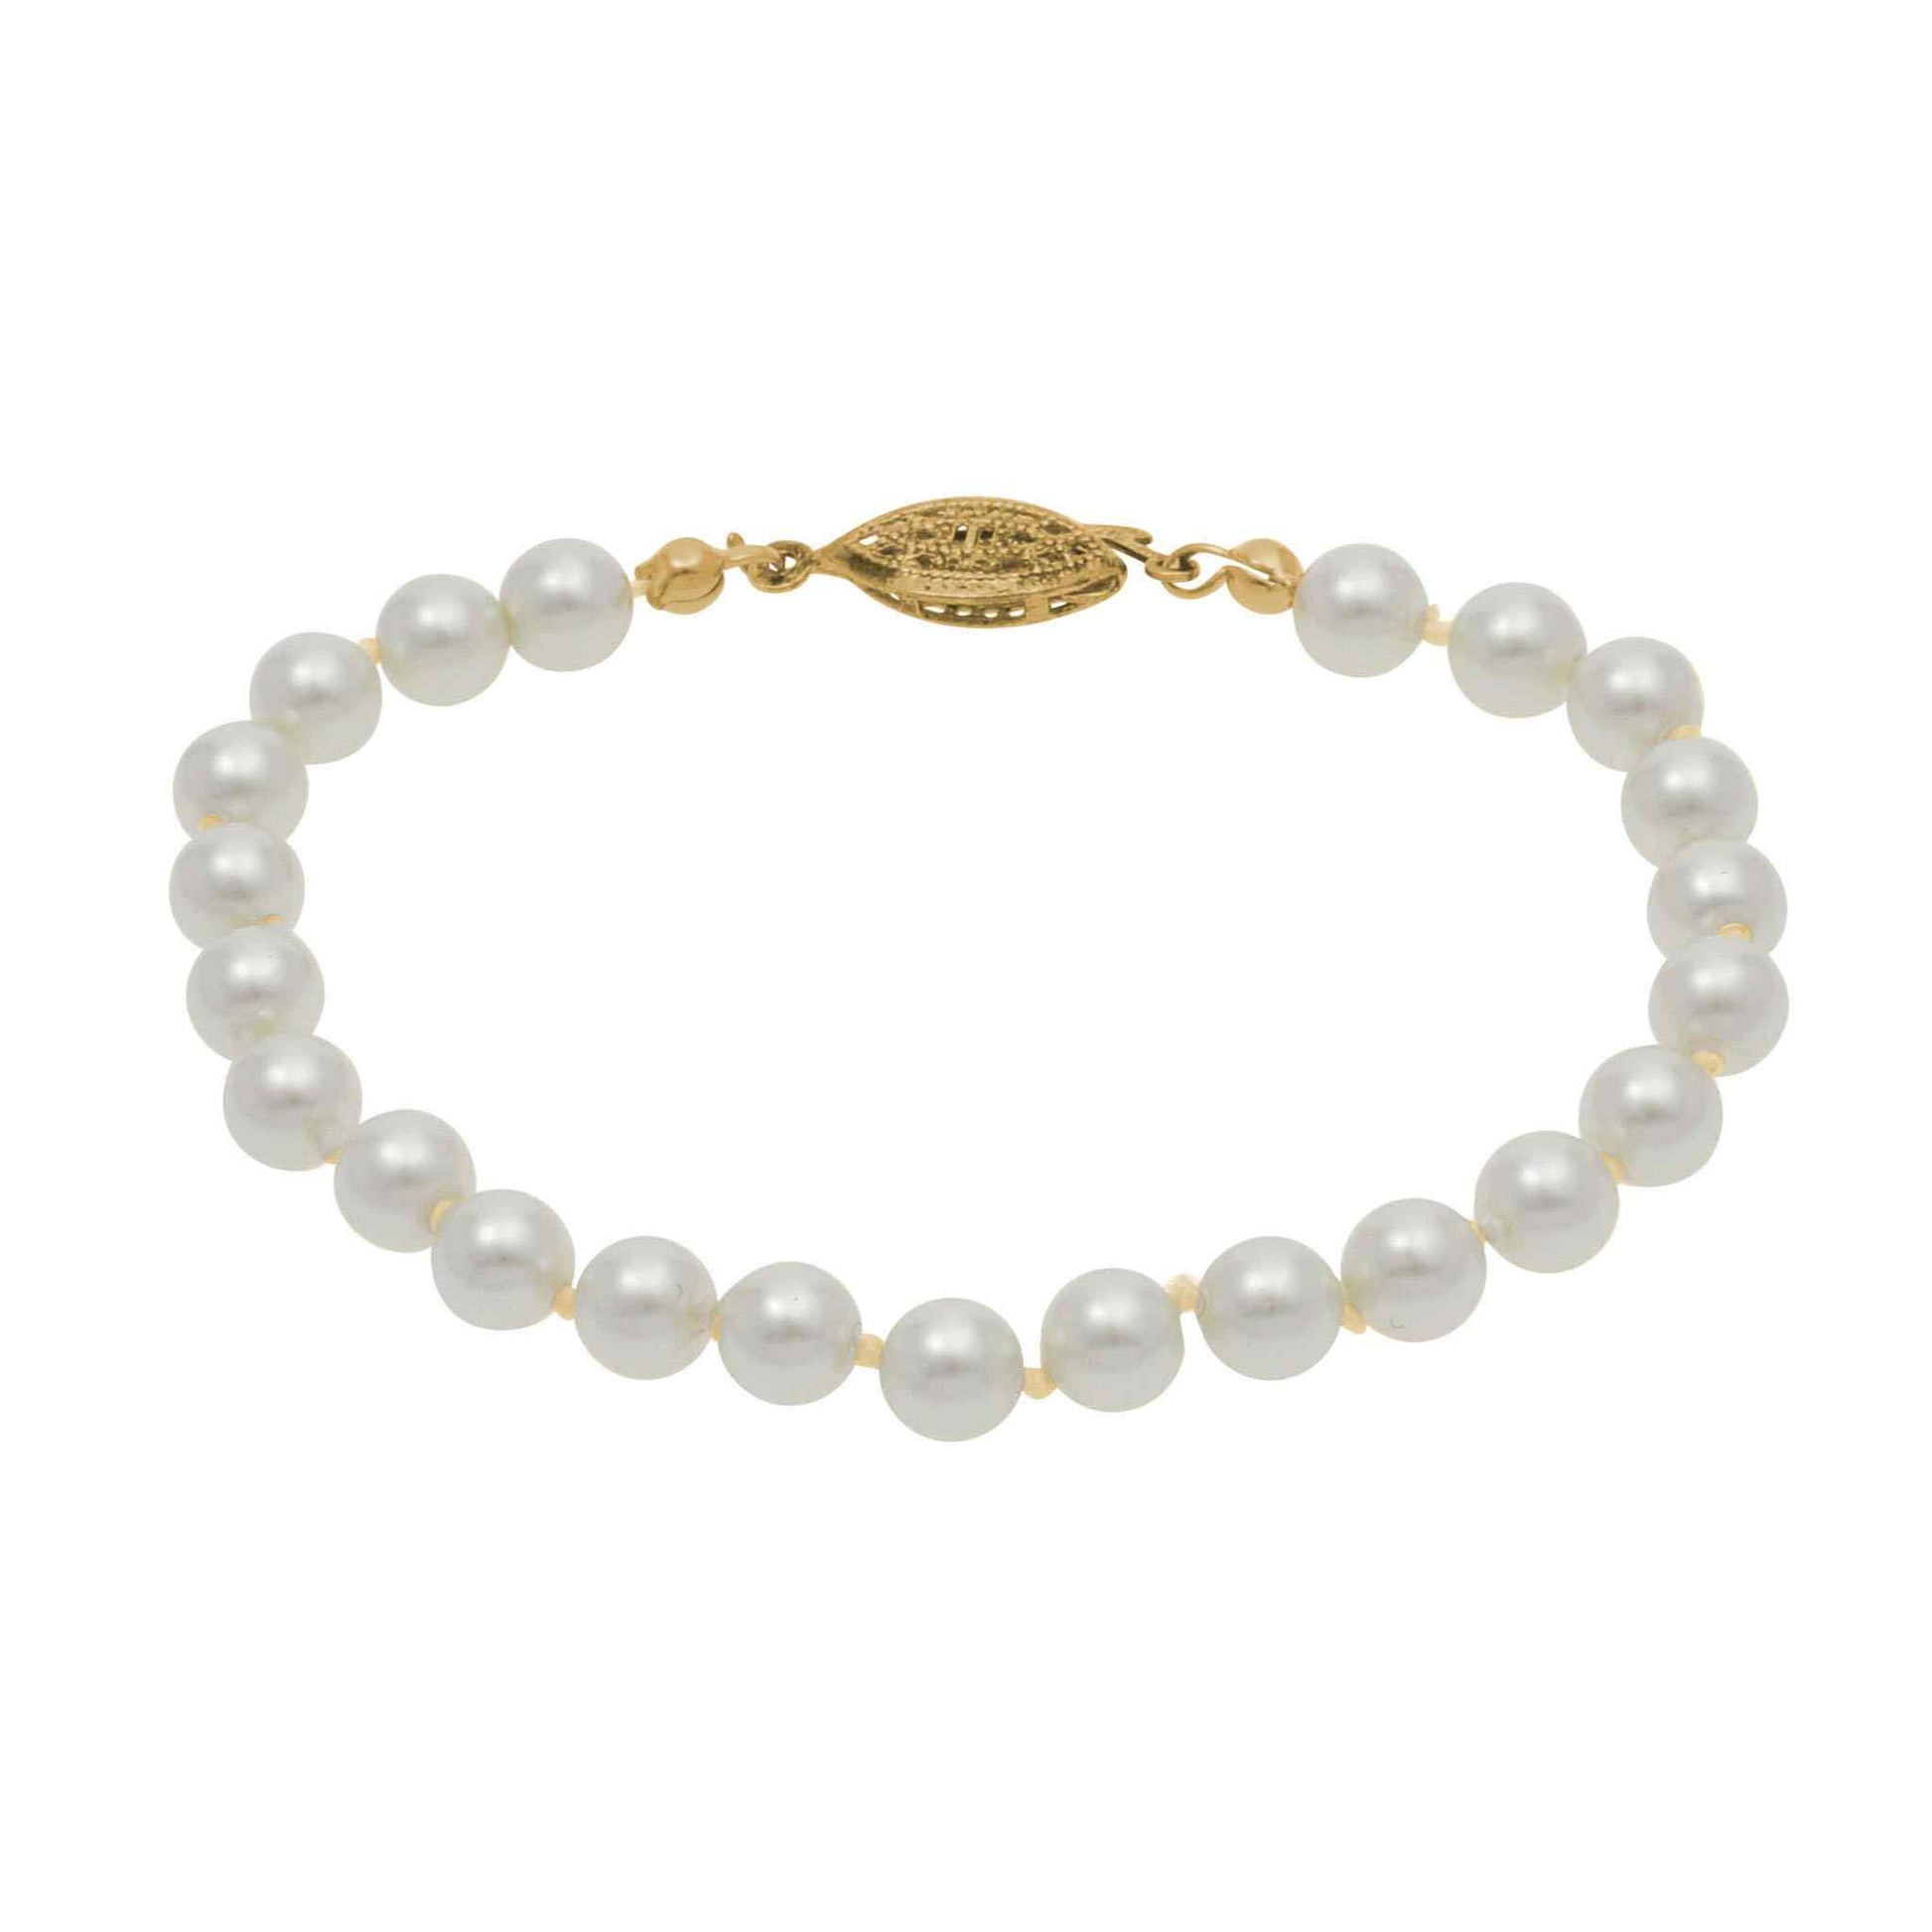 A knotted black glass pearl bracelet displayed on a neutral white background.